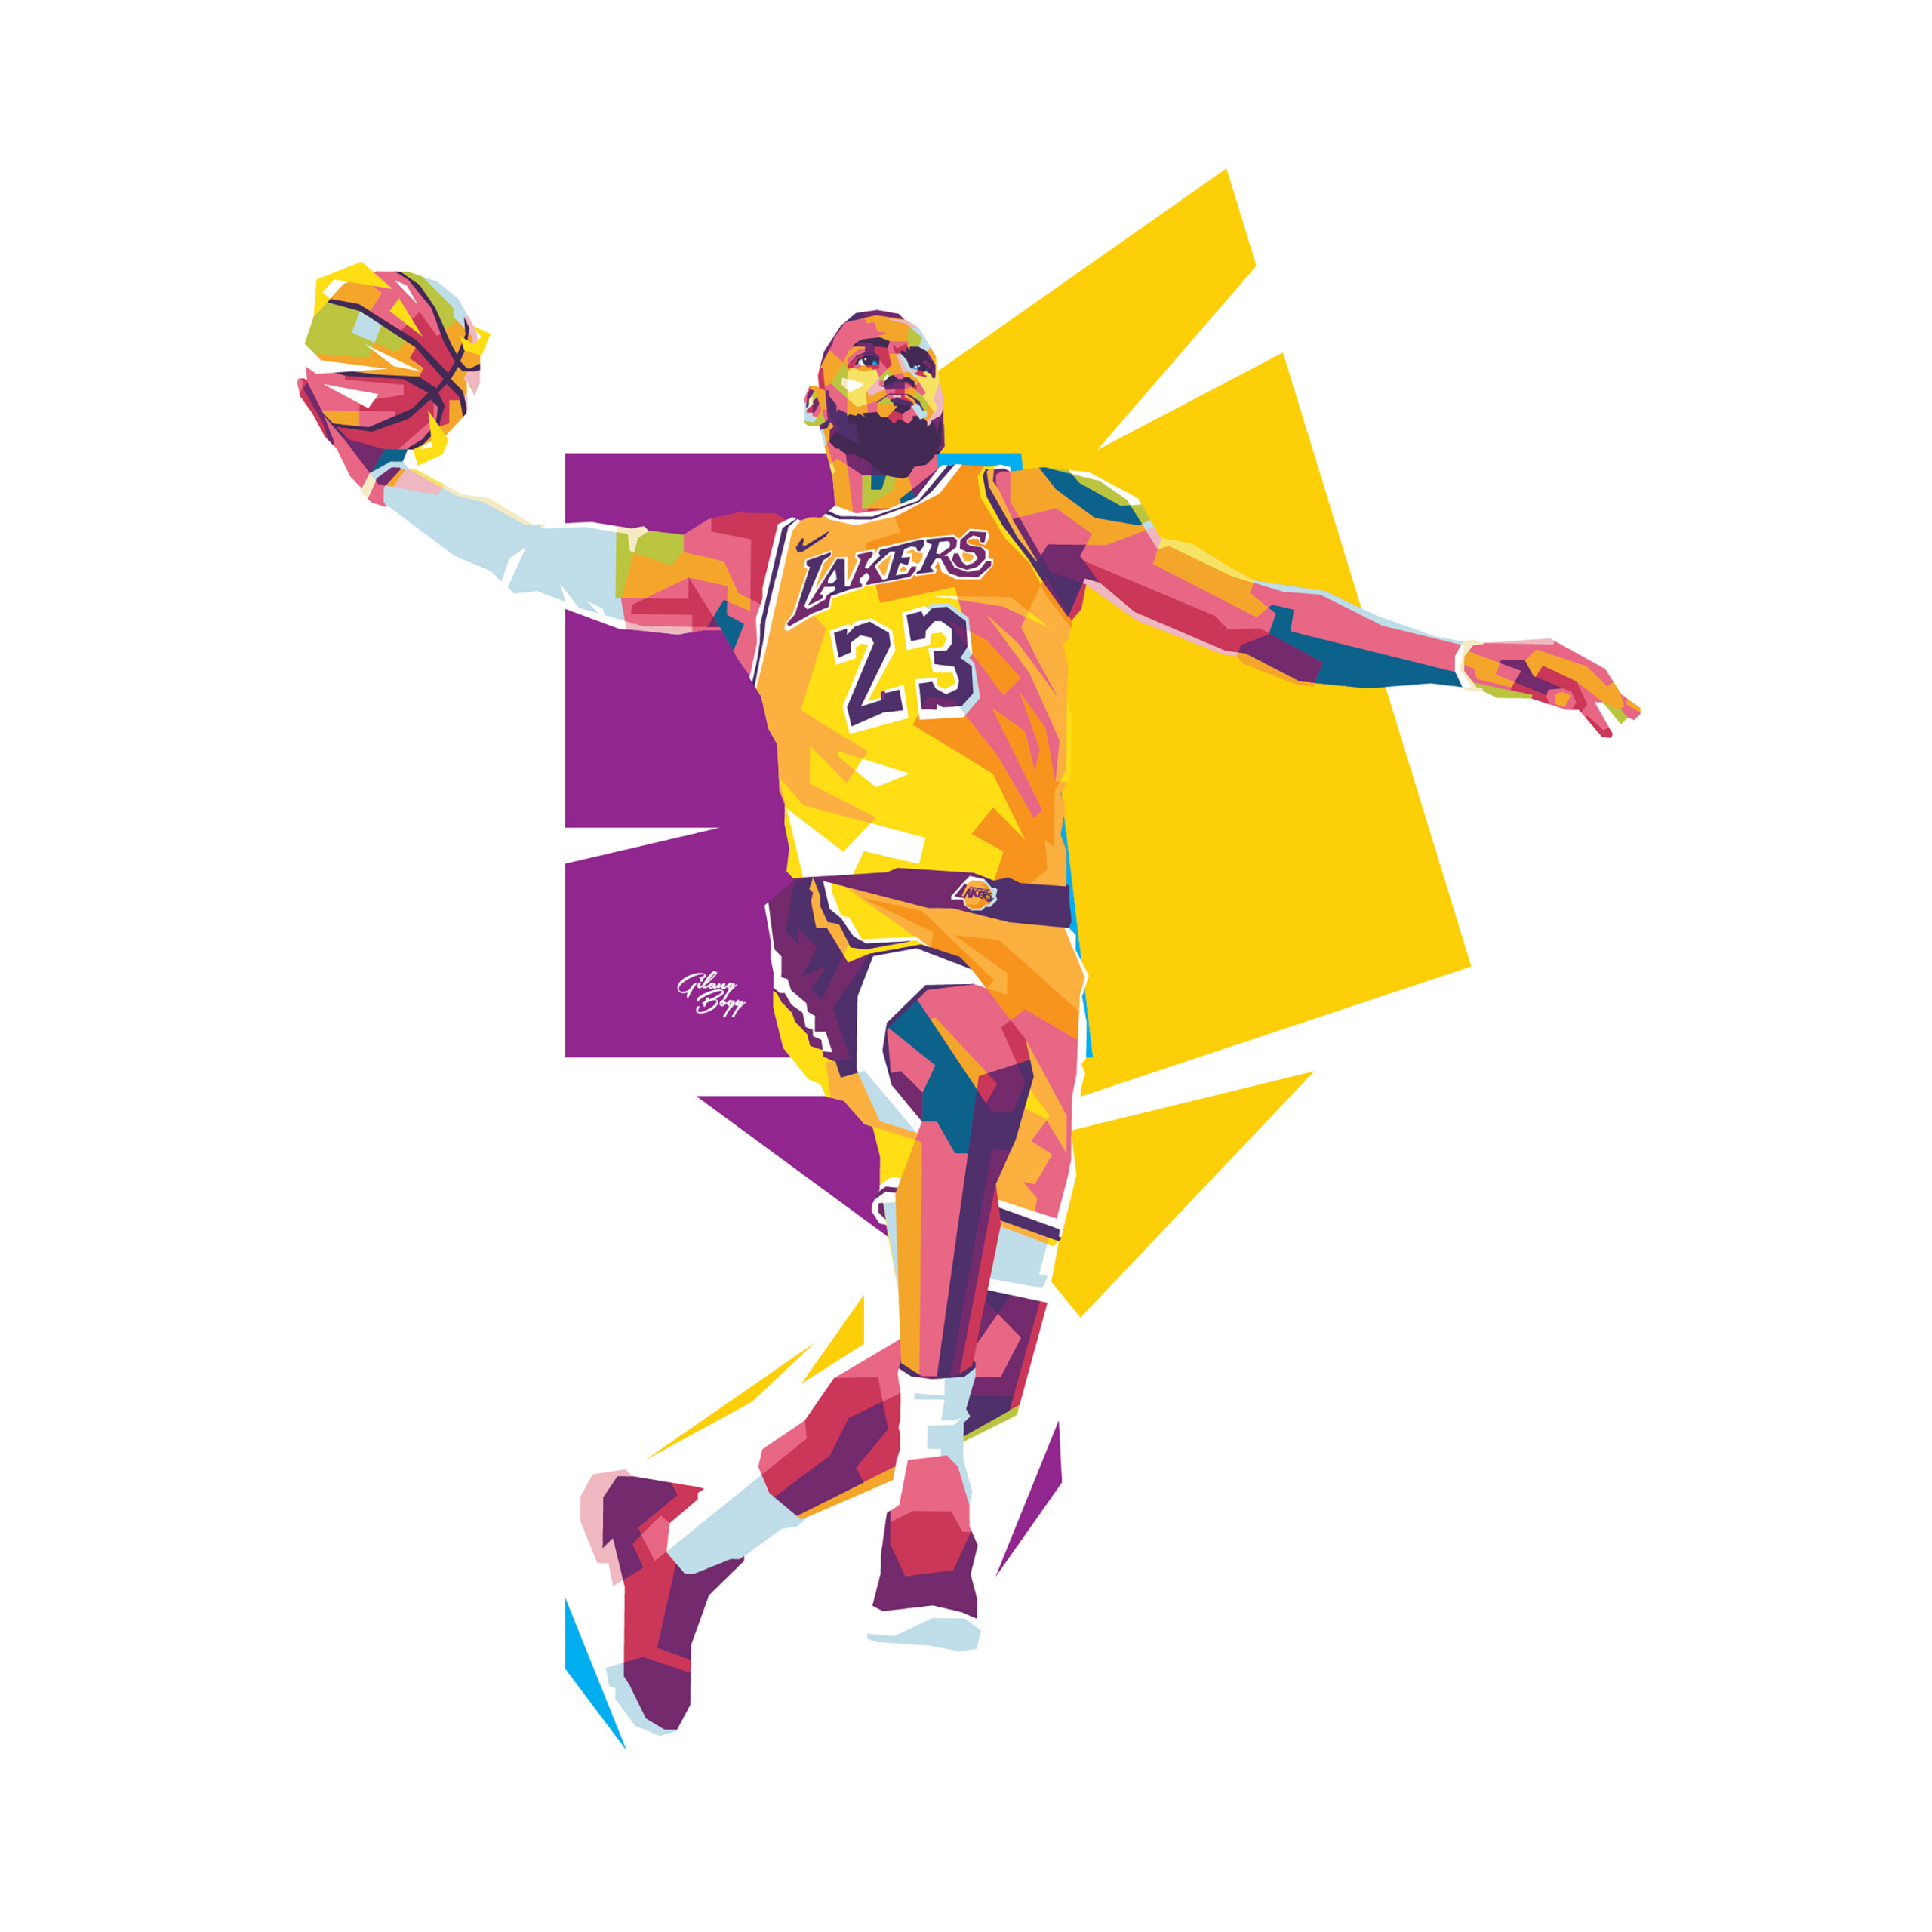 Free download Lakers Wallpapers 77 images 1080x1920 for your Desktop  Mobile  Tablet  Explore 56 Lakers 2020 Wallpapers  Lakers Championship  Wallpaper Lakers Wallpapers Lakers Desktop Wallpaper